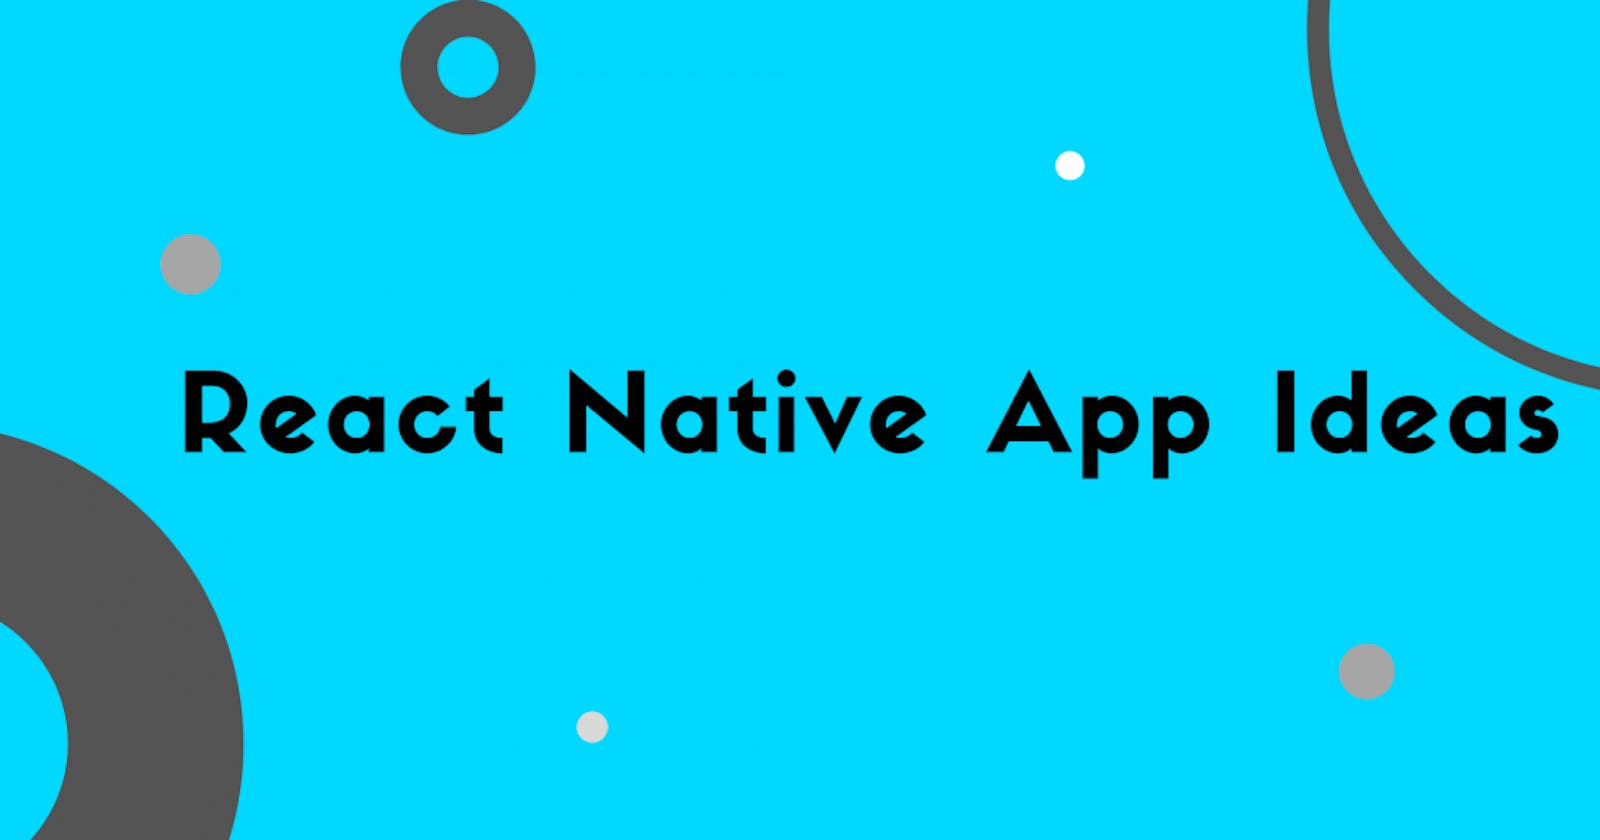 15 React Native App IDEAS: BEGINNER TO EXPERT [WITH FREE TUTORIAL]